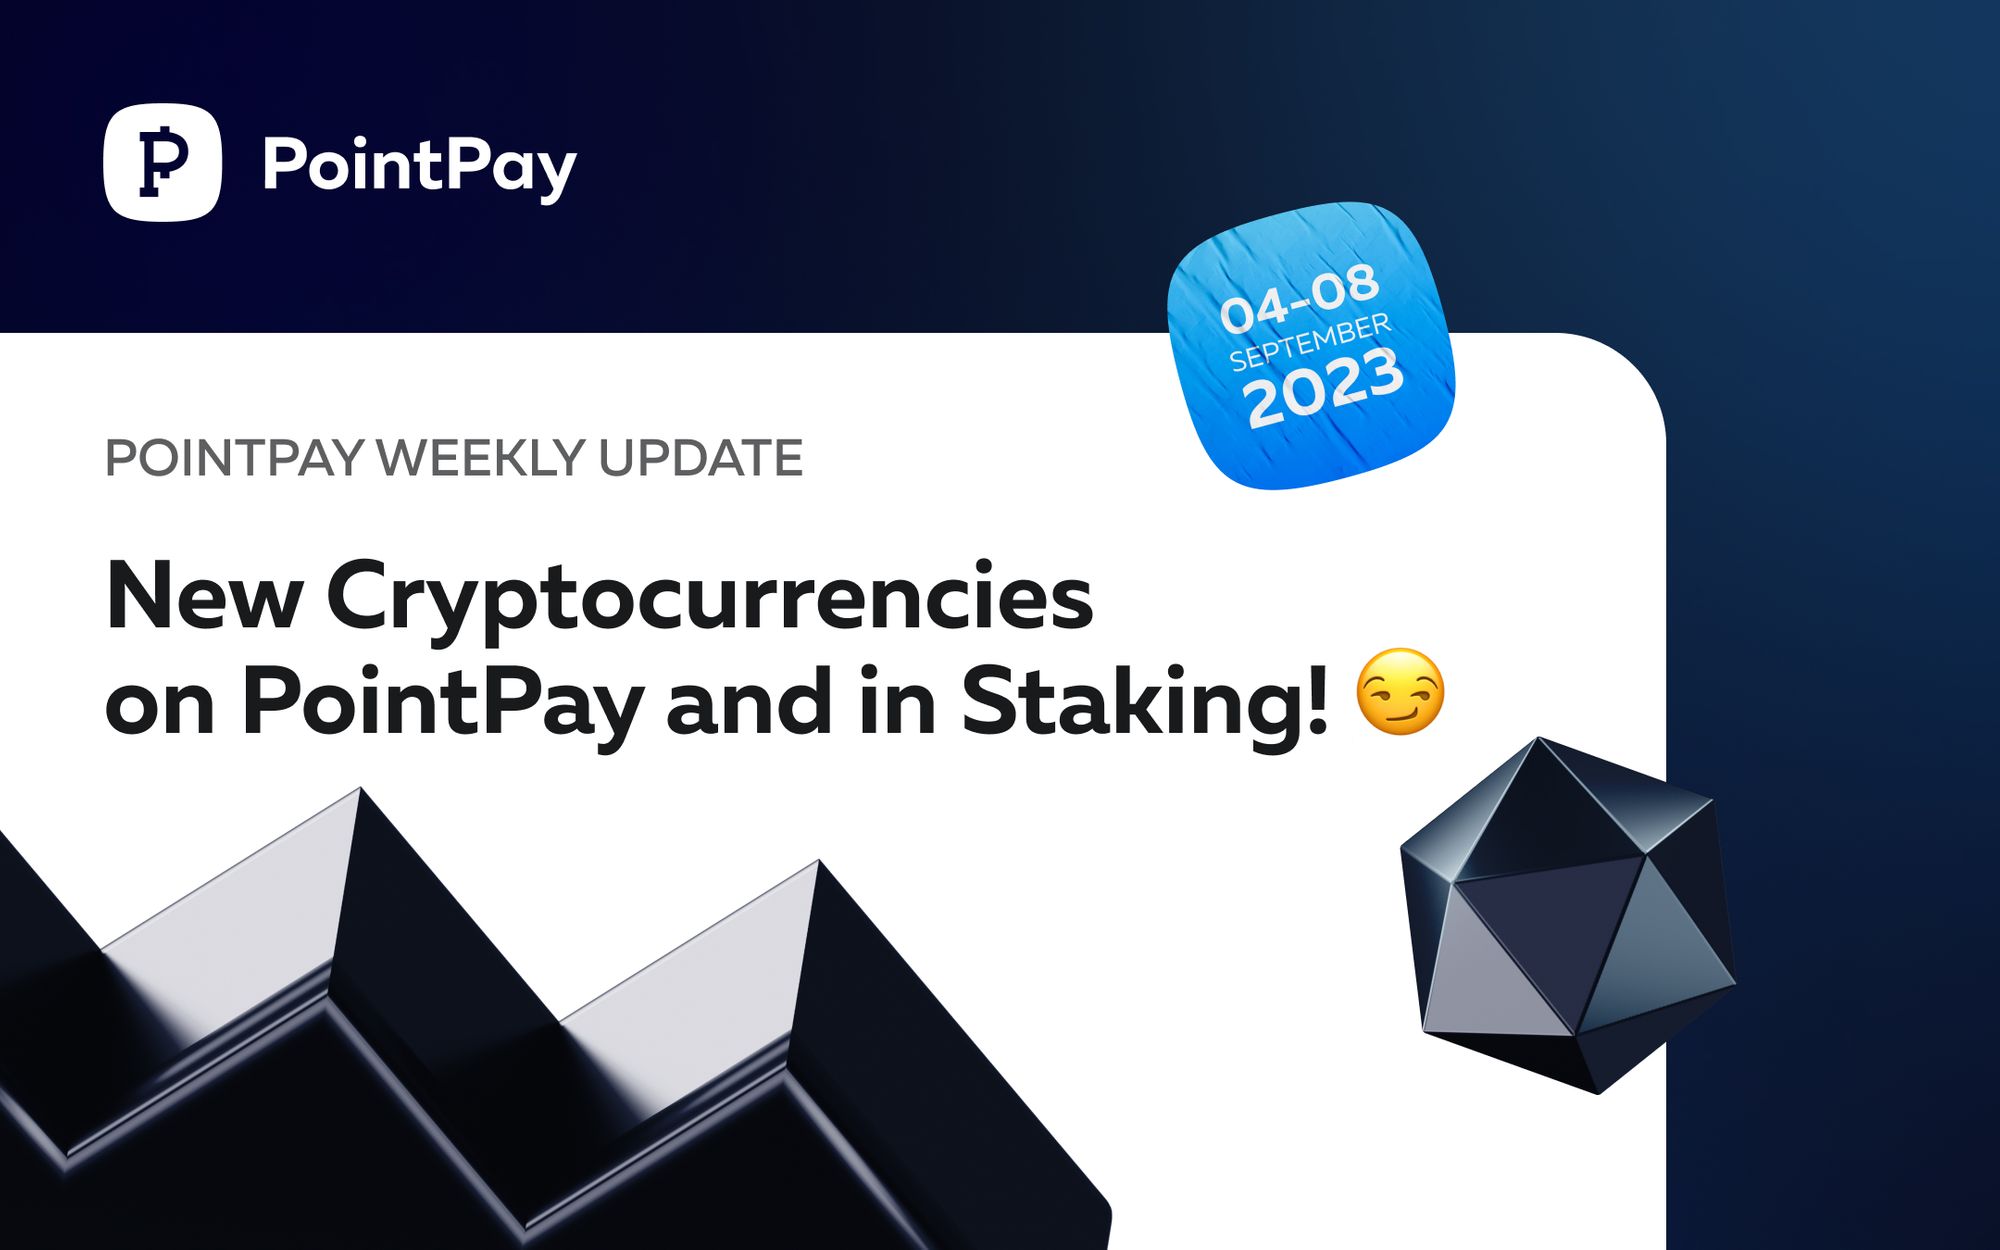 PointPay Weekly Update (4 - 8 September 2023)